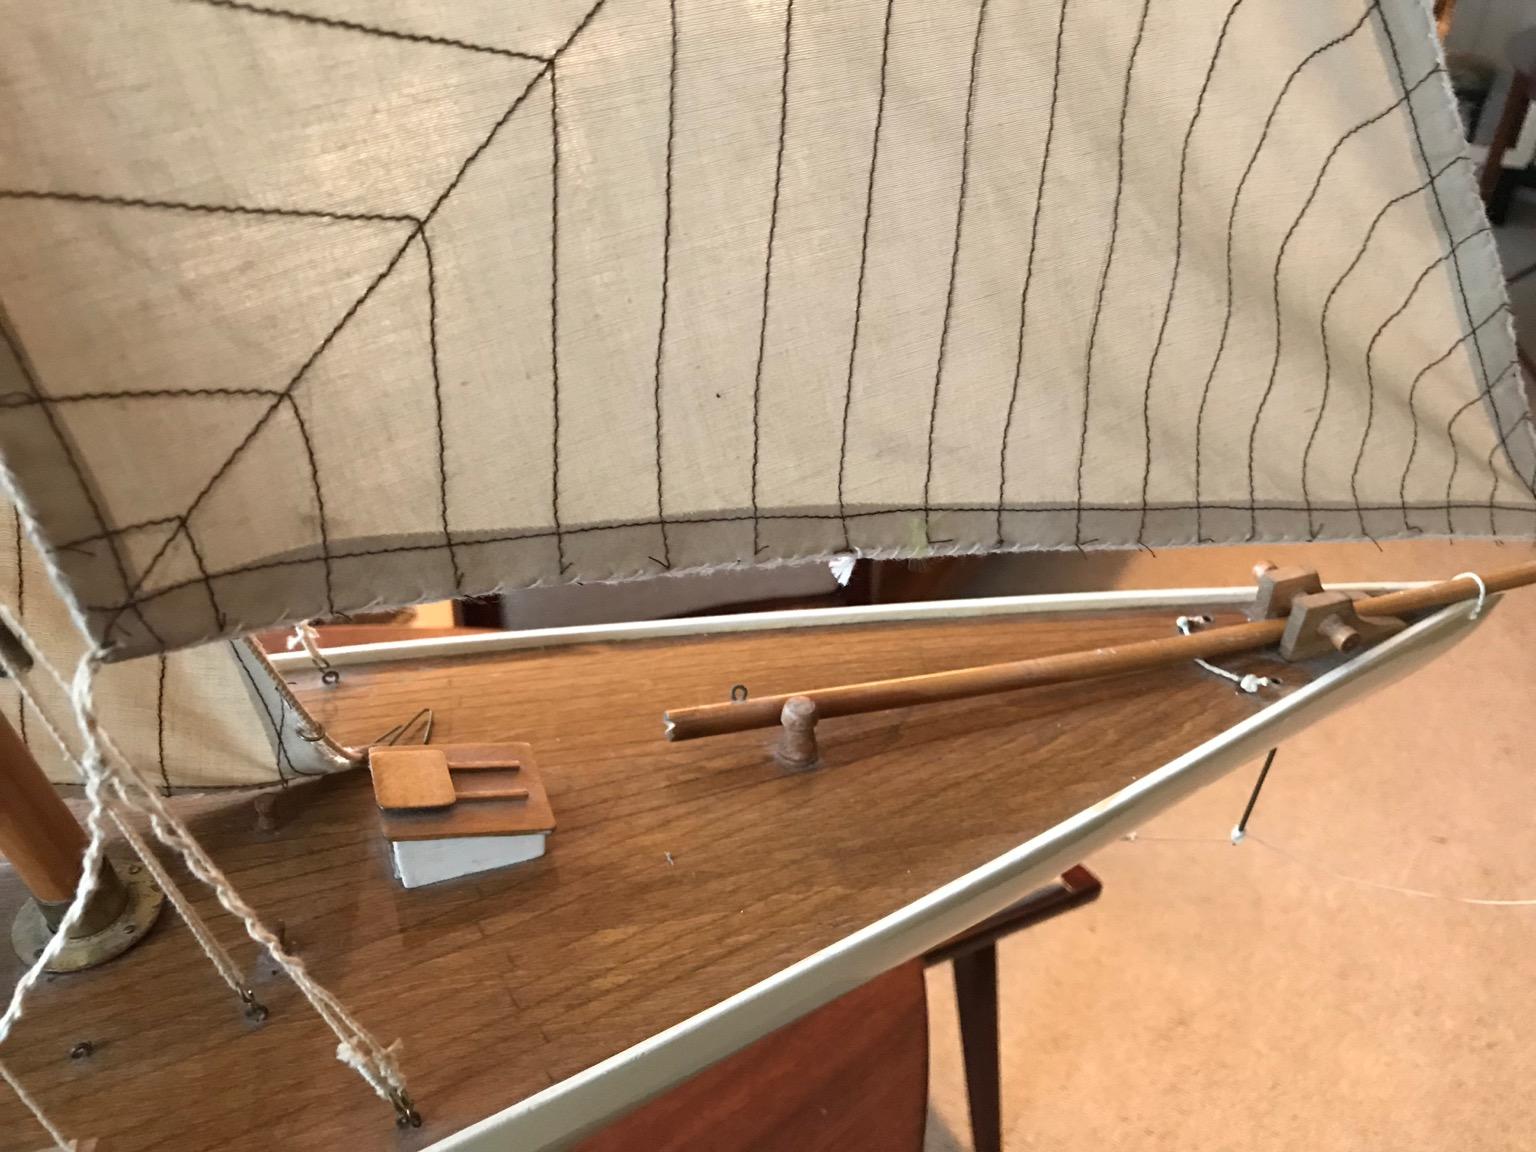 Other Model Sailboat of Impressive Stature and Workmanship For Sale